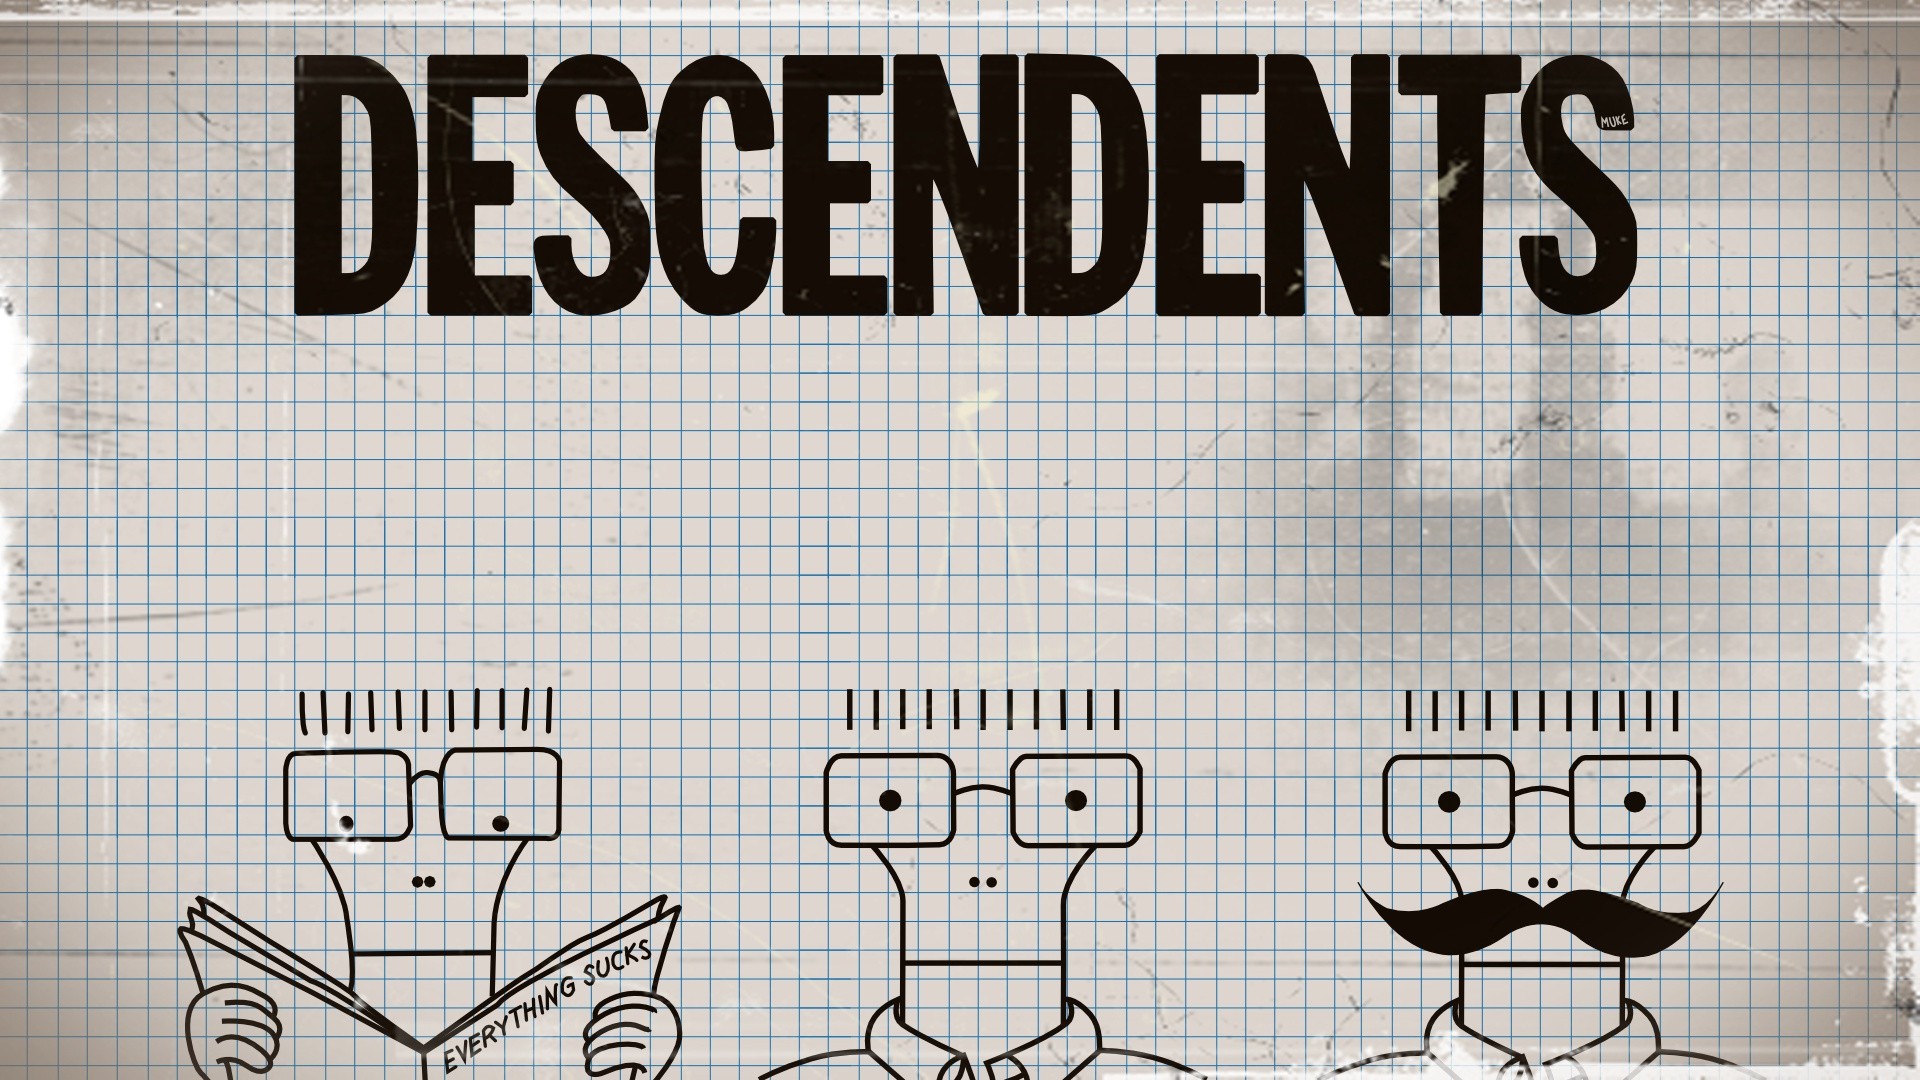 General 1920x1080 music album covers Descendents band